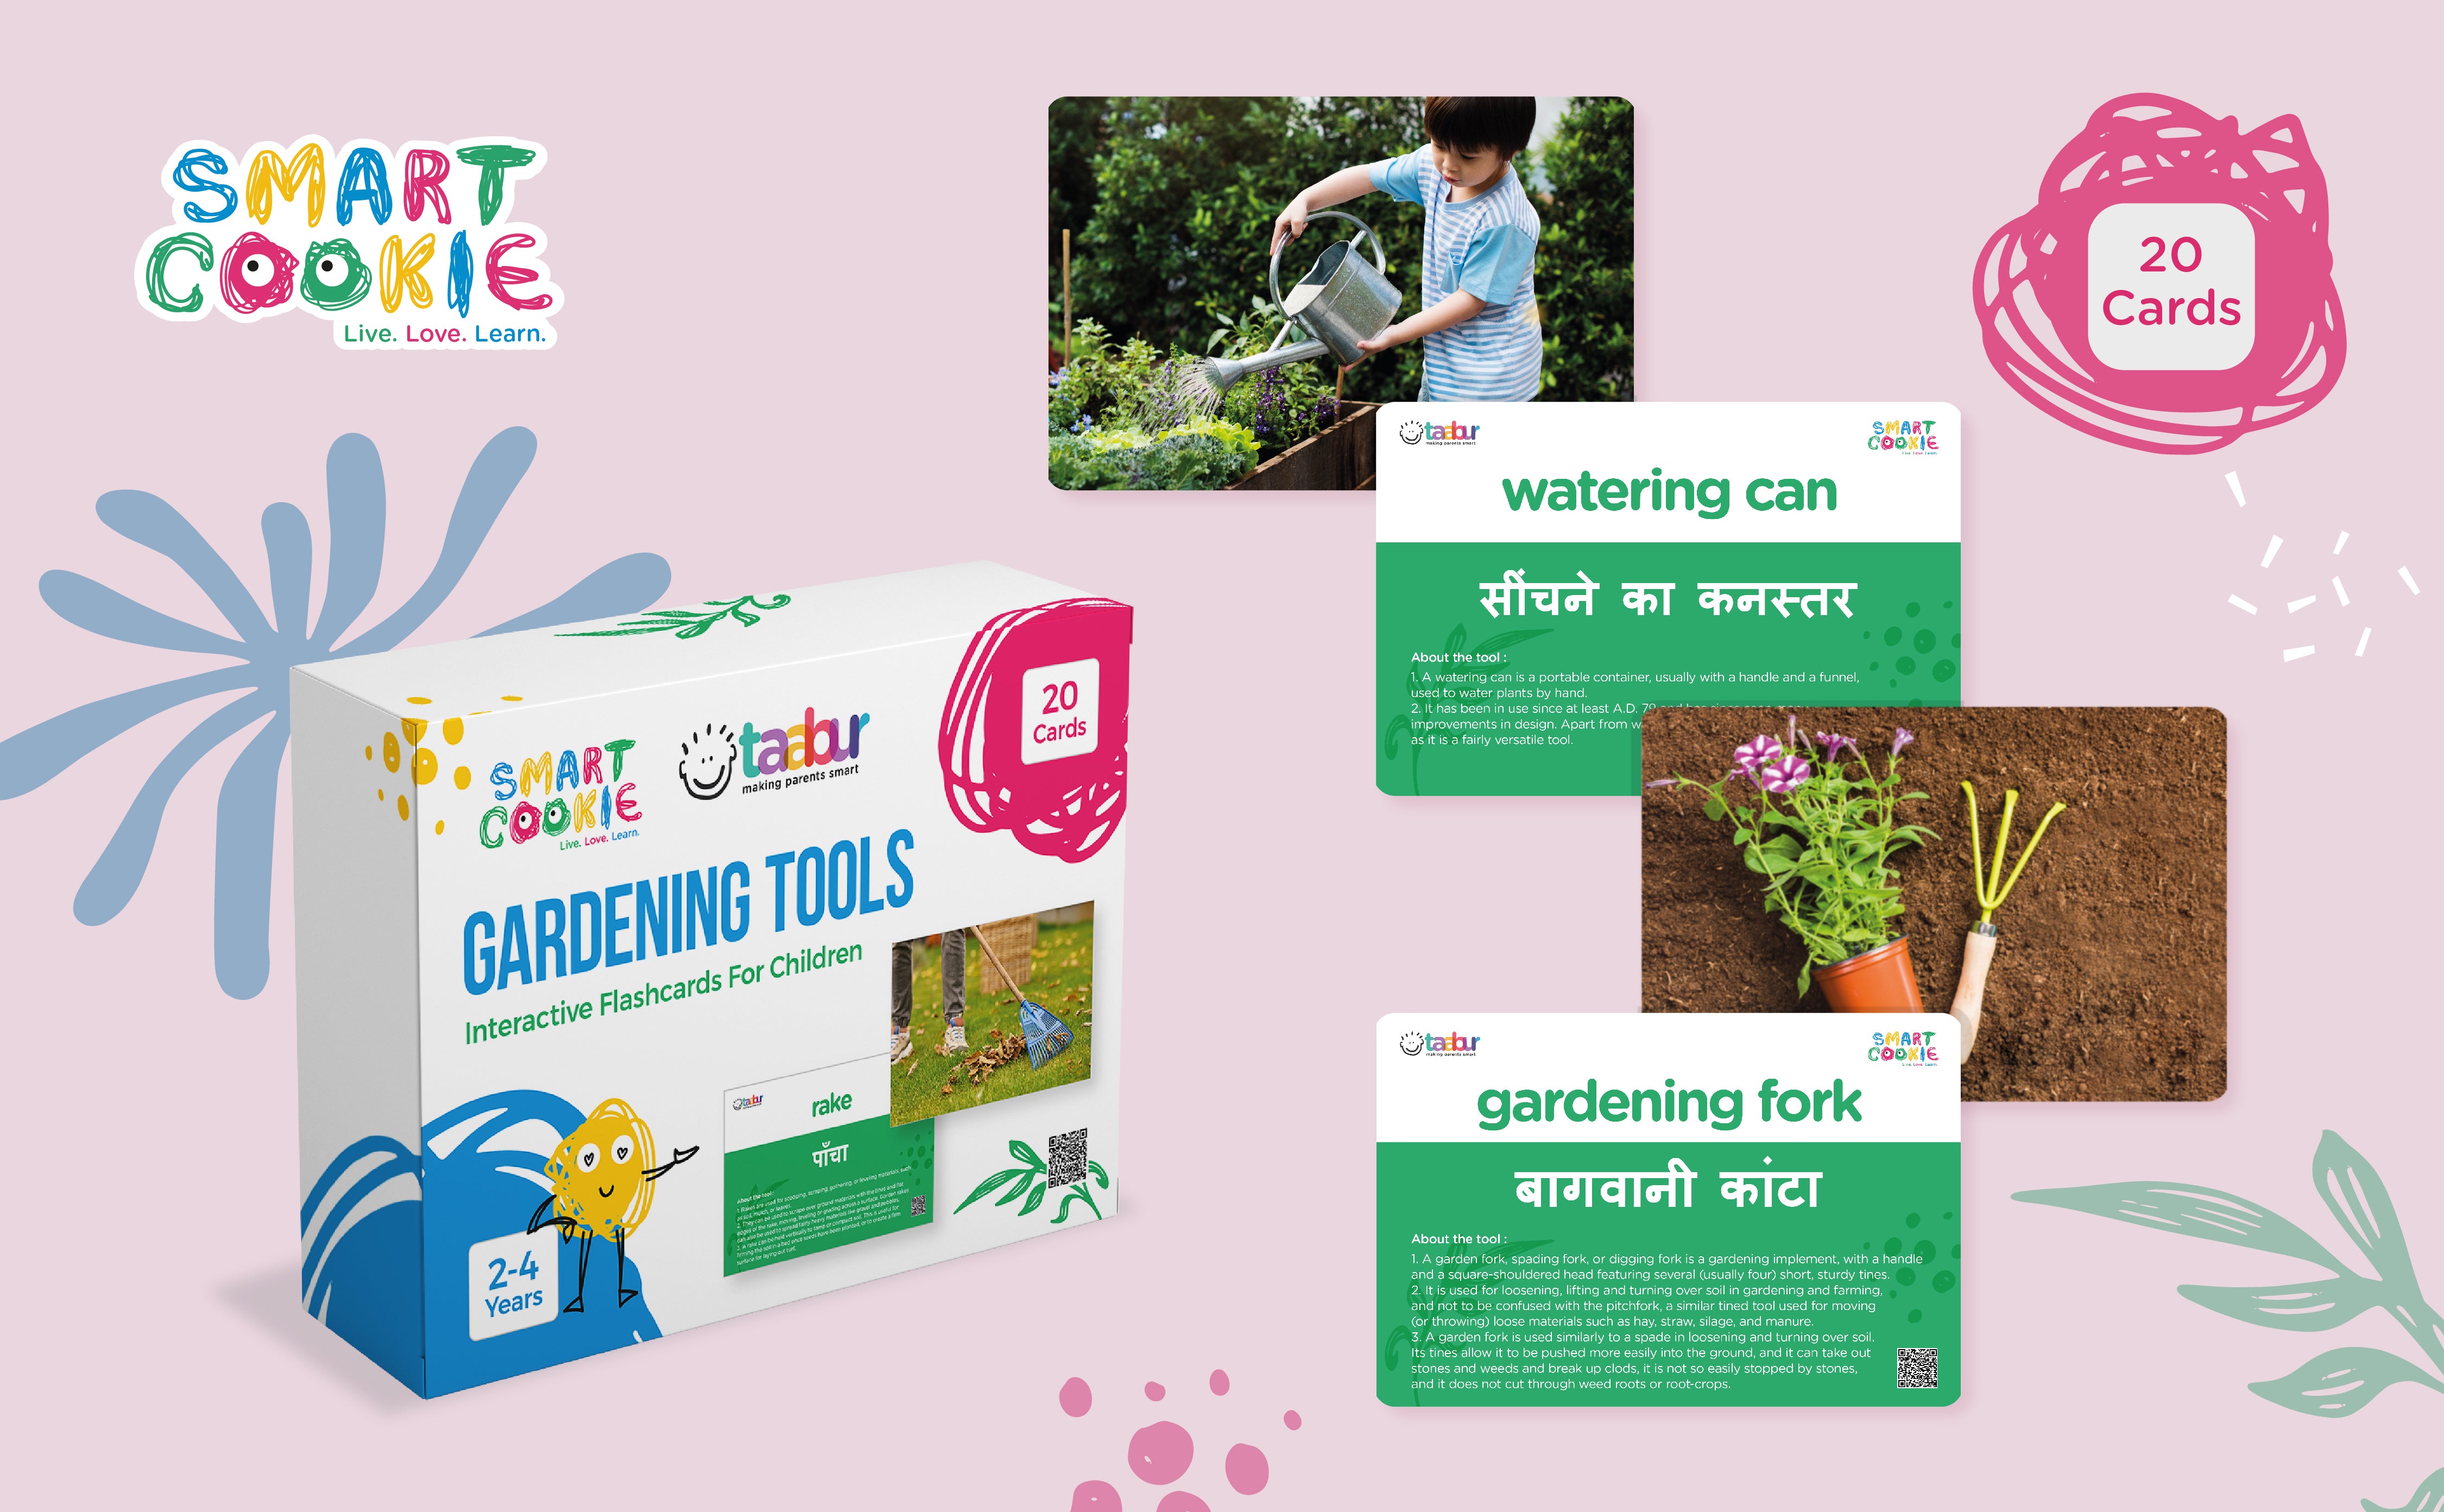 Gardening Tools - Interactive Flash Cards for Children (20 Cards) - for Kids Aged 2 to 4 Years Old